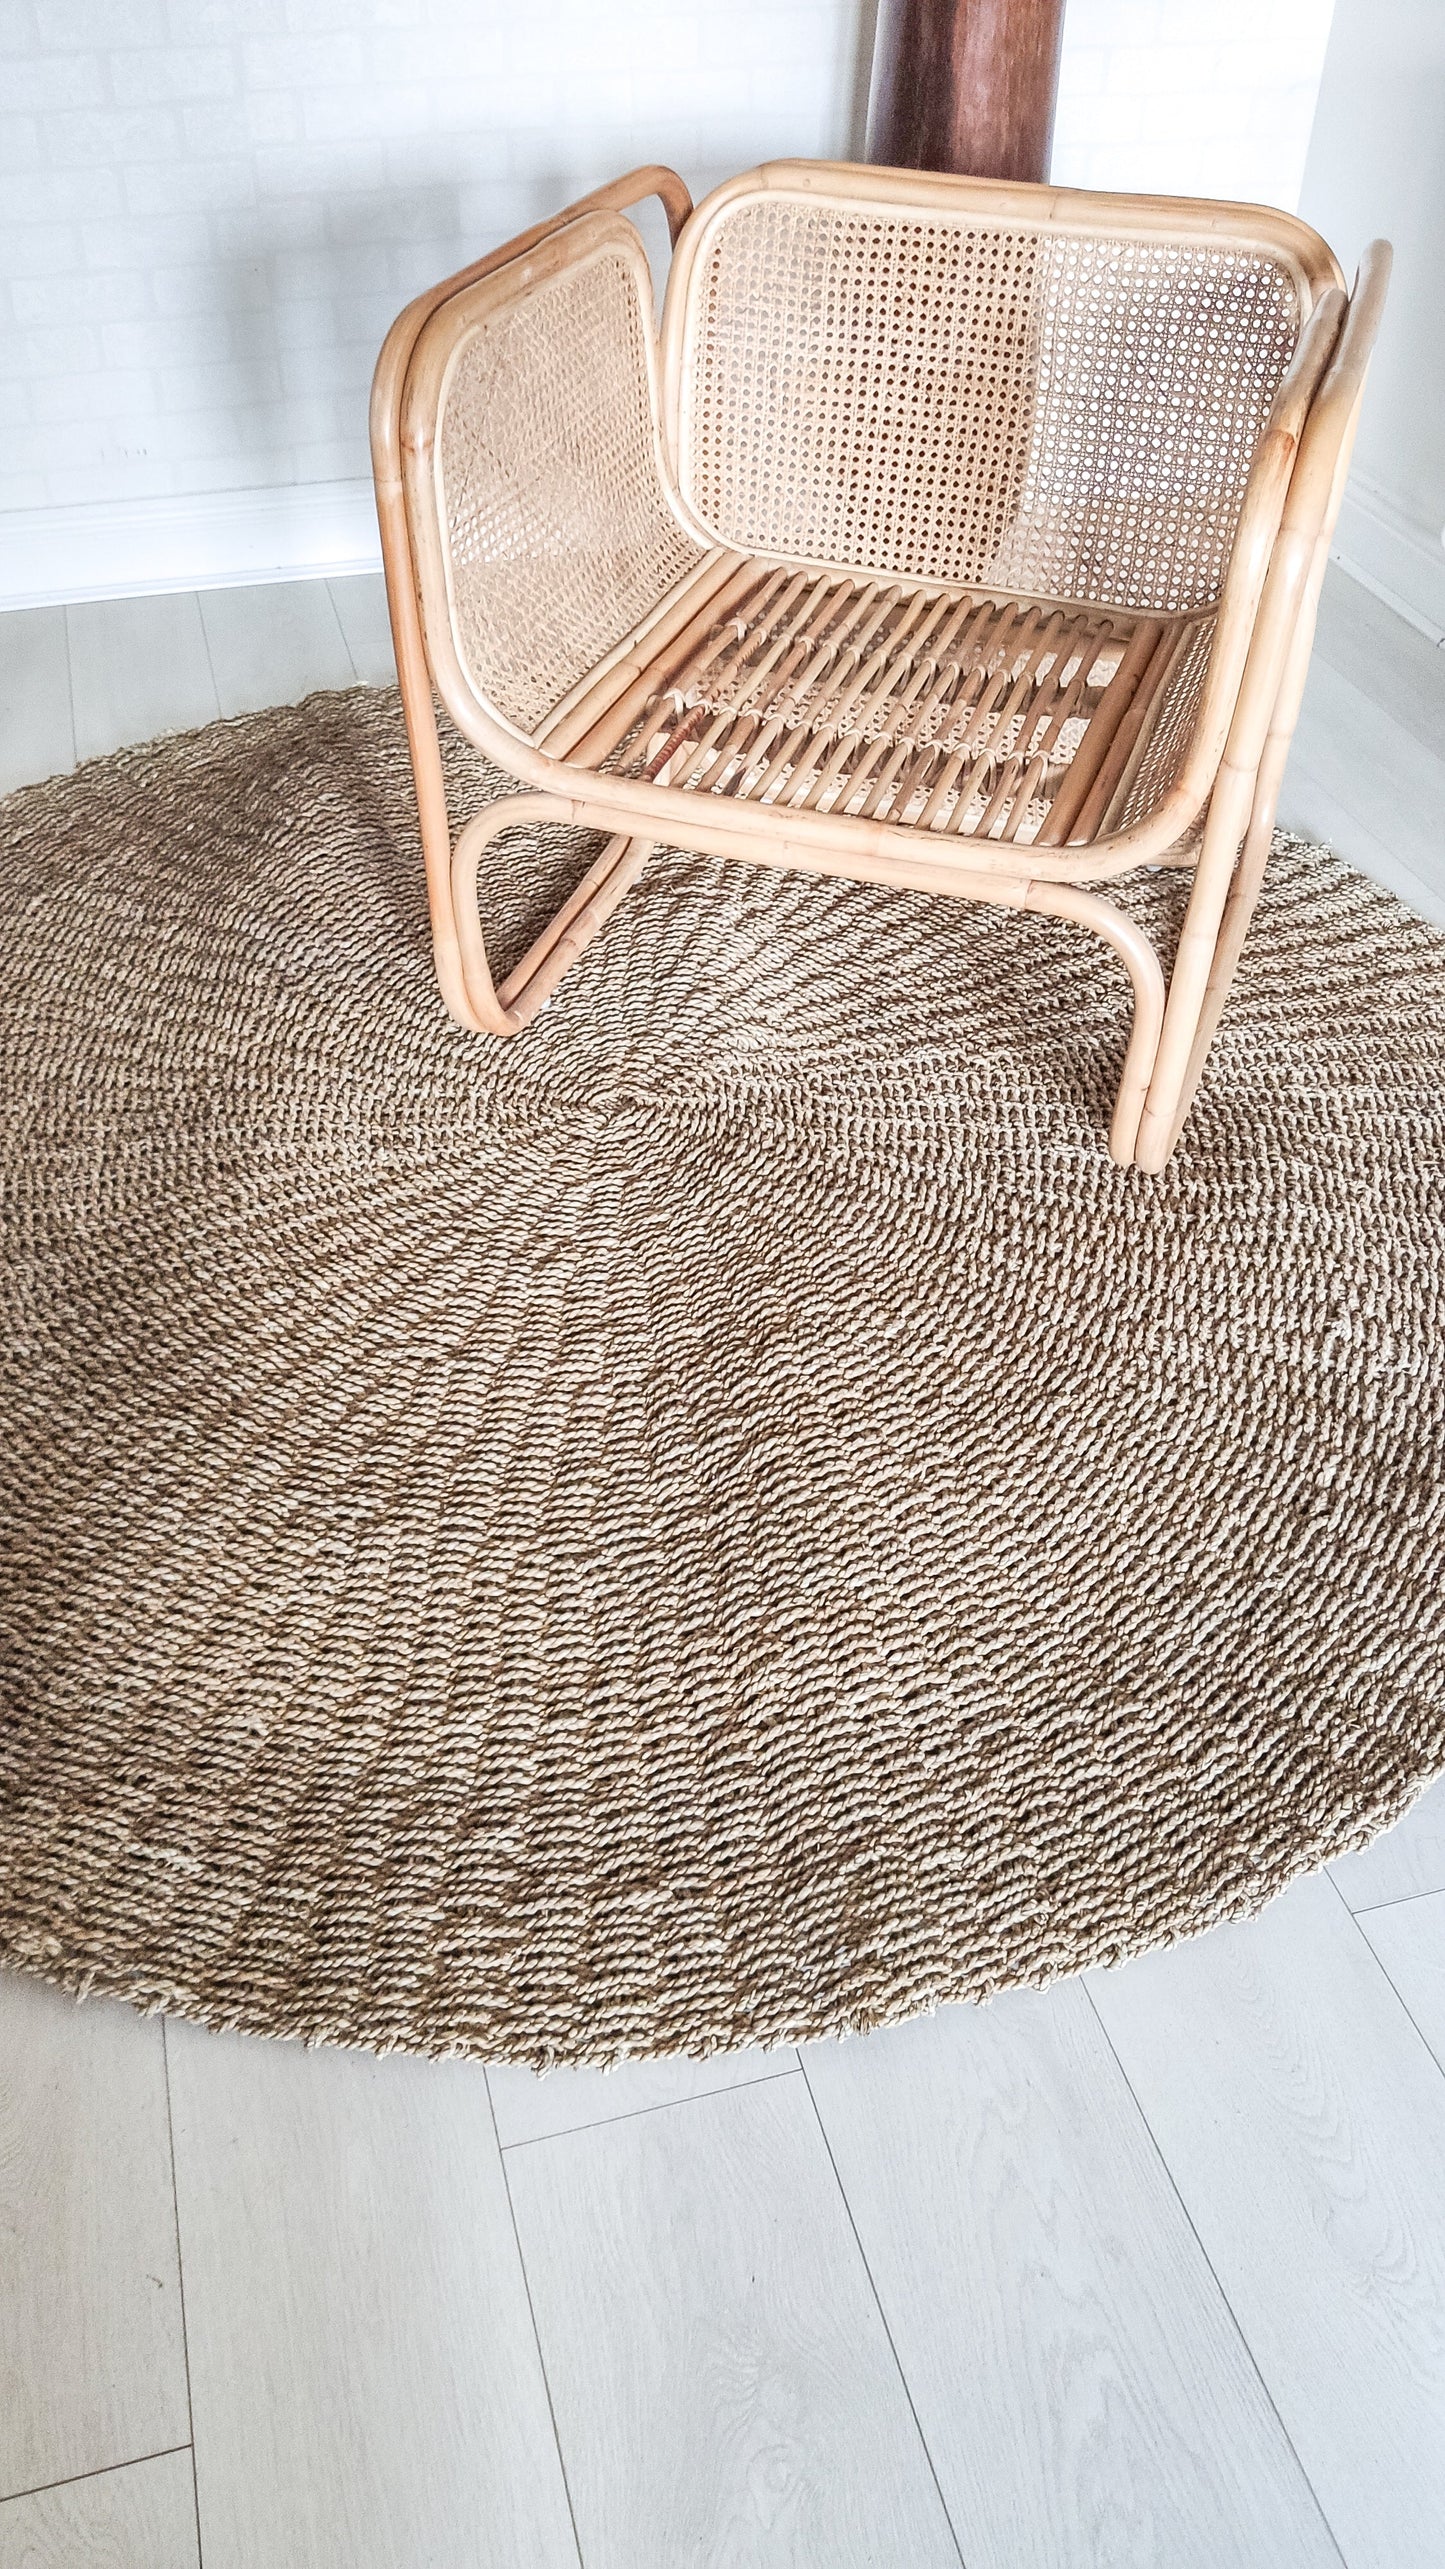 NATURAL SEAGRASS RUG 200cm